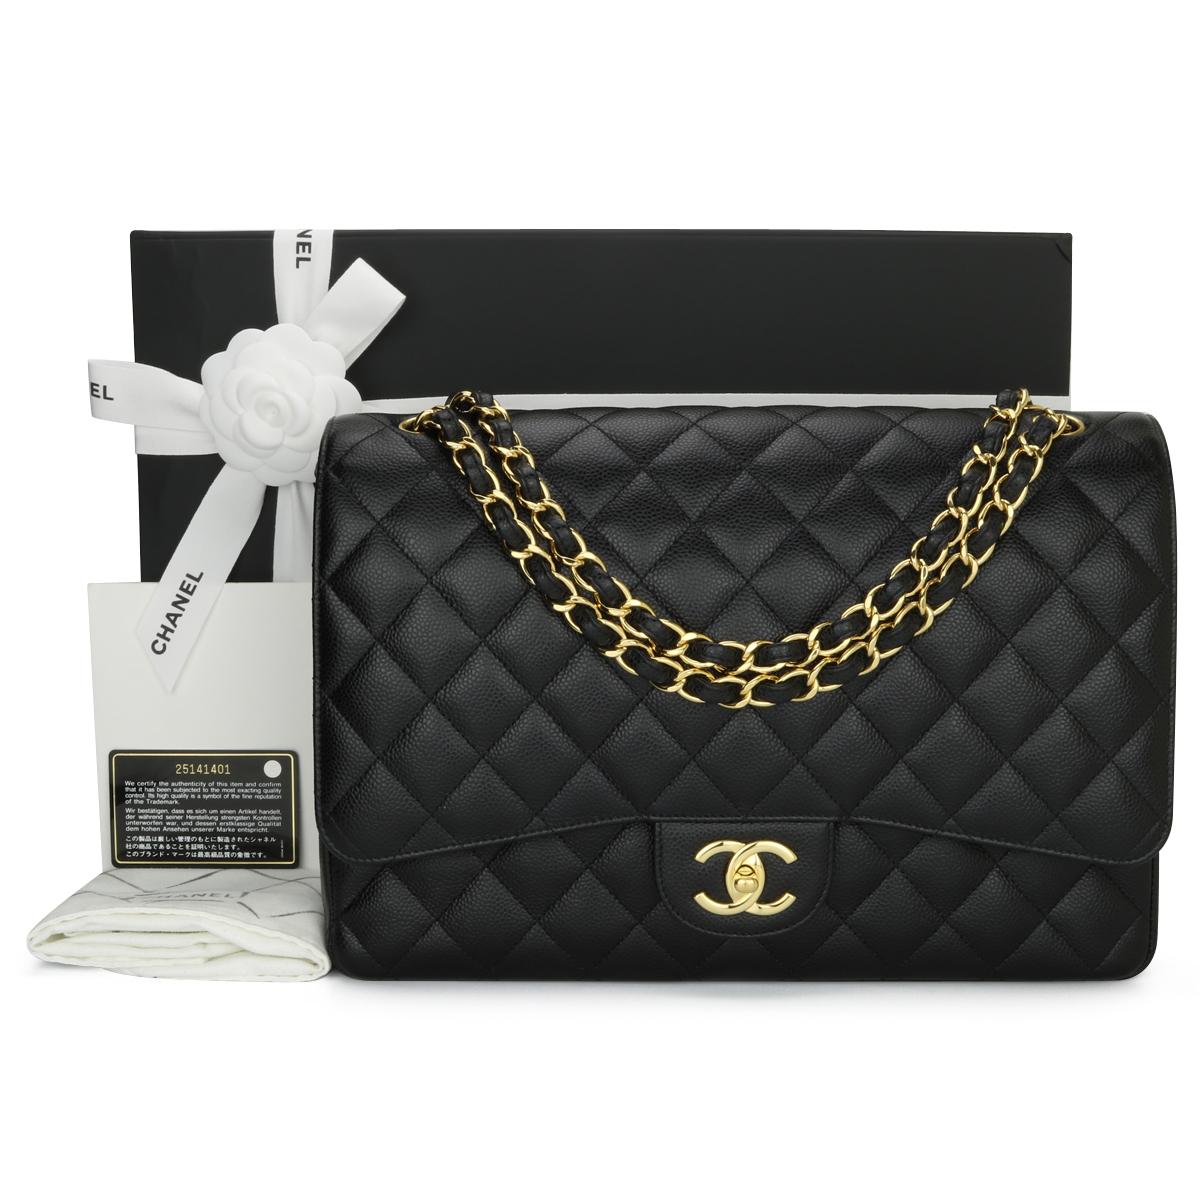 CHANEL Classic Double Flap Maxi Bag Black Caviar with Gold Hardware 2018.

This stunning bag is in excellent condition, the bag still holds its original shape, and the hardware is still very shiny.

- Exterior Condition: Mint condition. Corners show